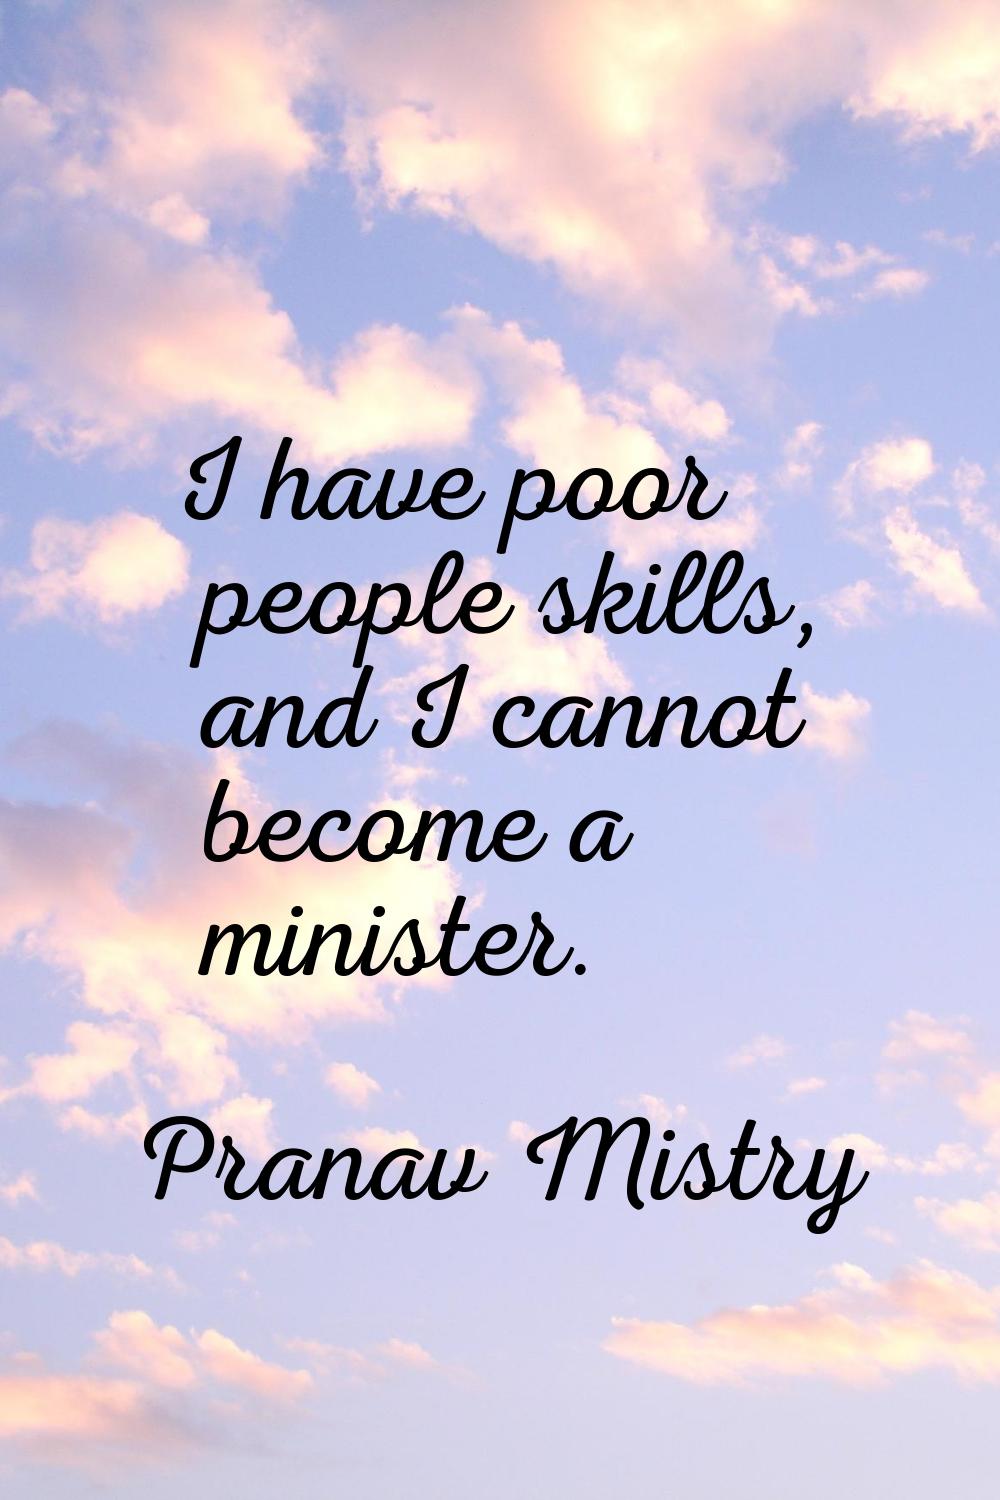 I have poor people skills, and I cannot become a minister.